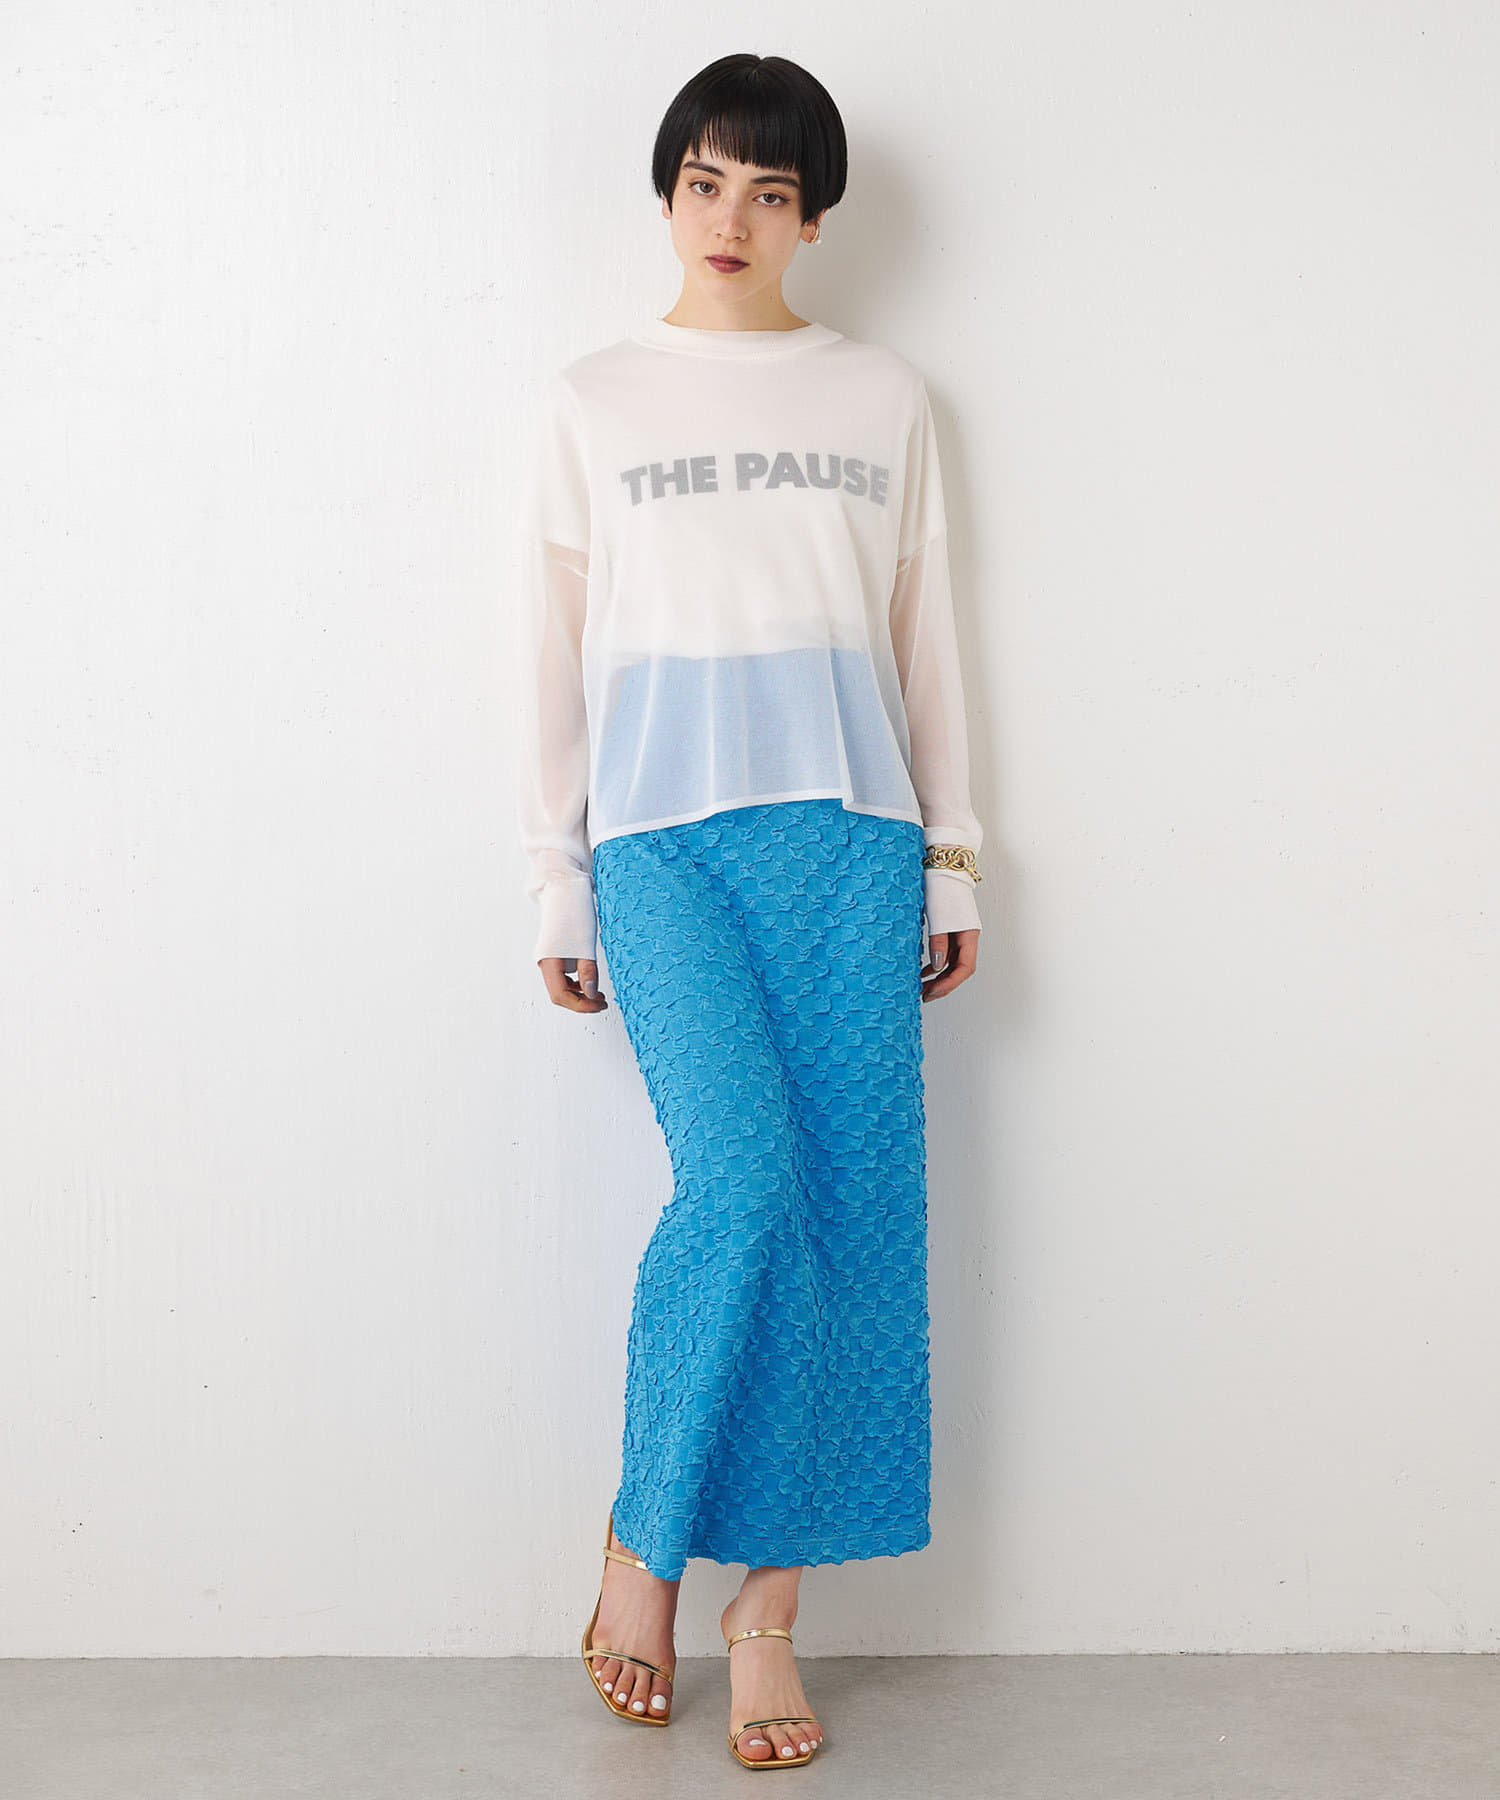 THE PAUSE】THE PAUSE Tシャツ | Whim Gazette(ウィム ガゼット 